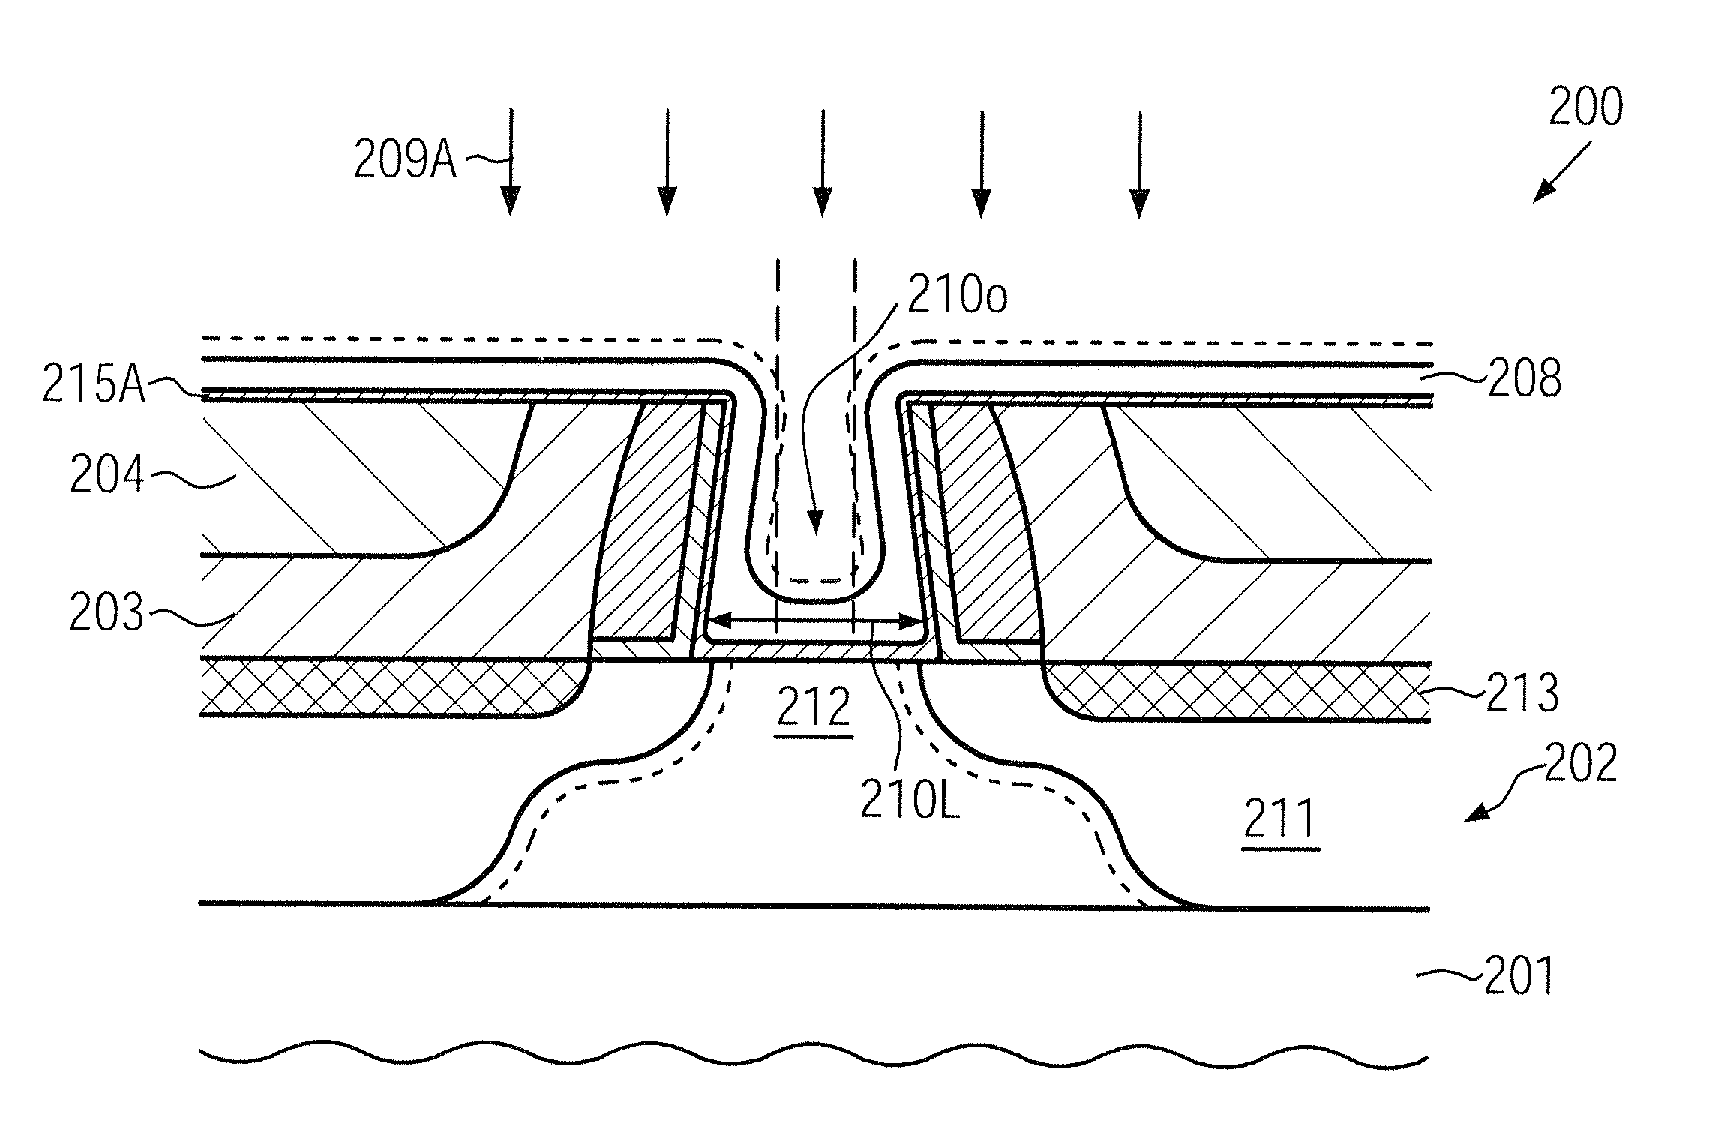 High-k gate electrode structure formed after transistor fabrication by using a spacer